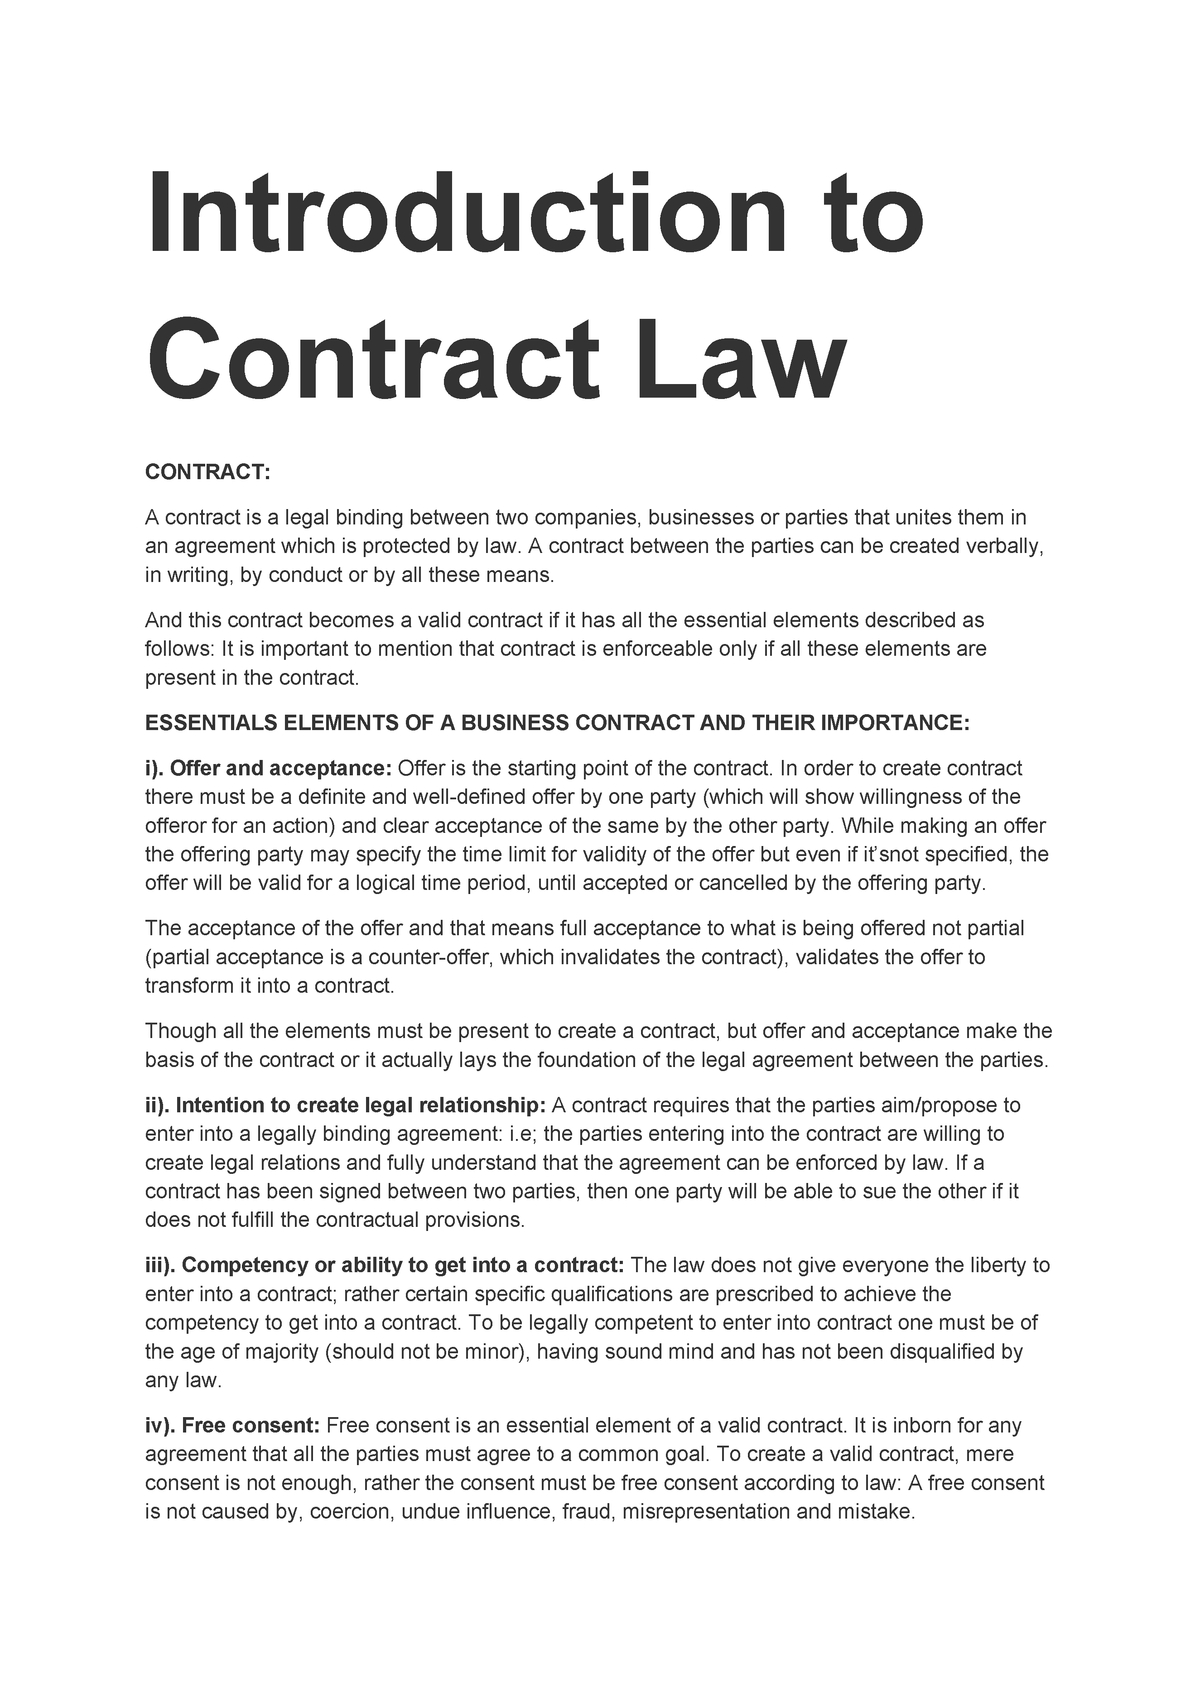 Legal Agreement Between Two Parties Introduction To Contract Law 08 21220 Law Of Contract Studocu